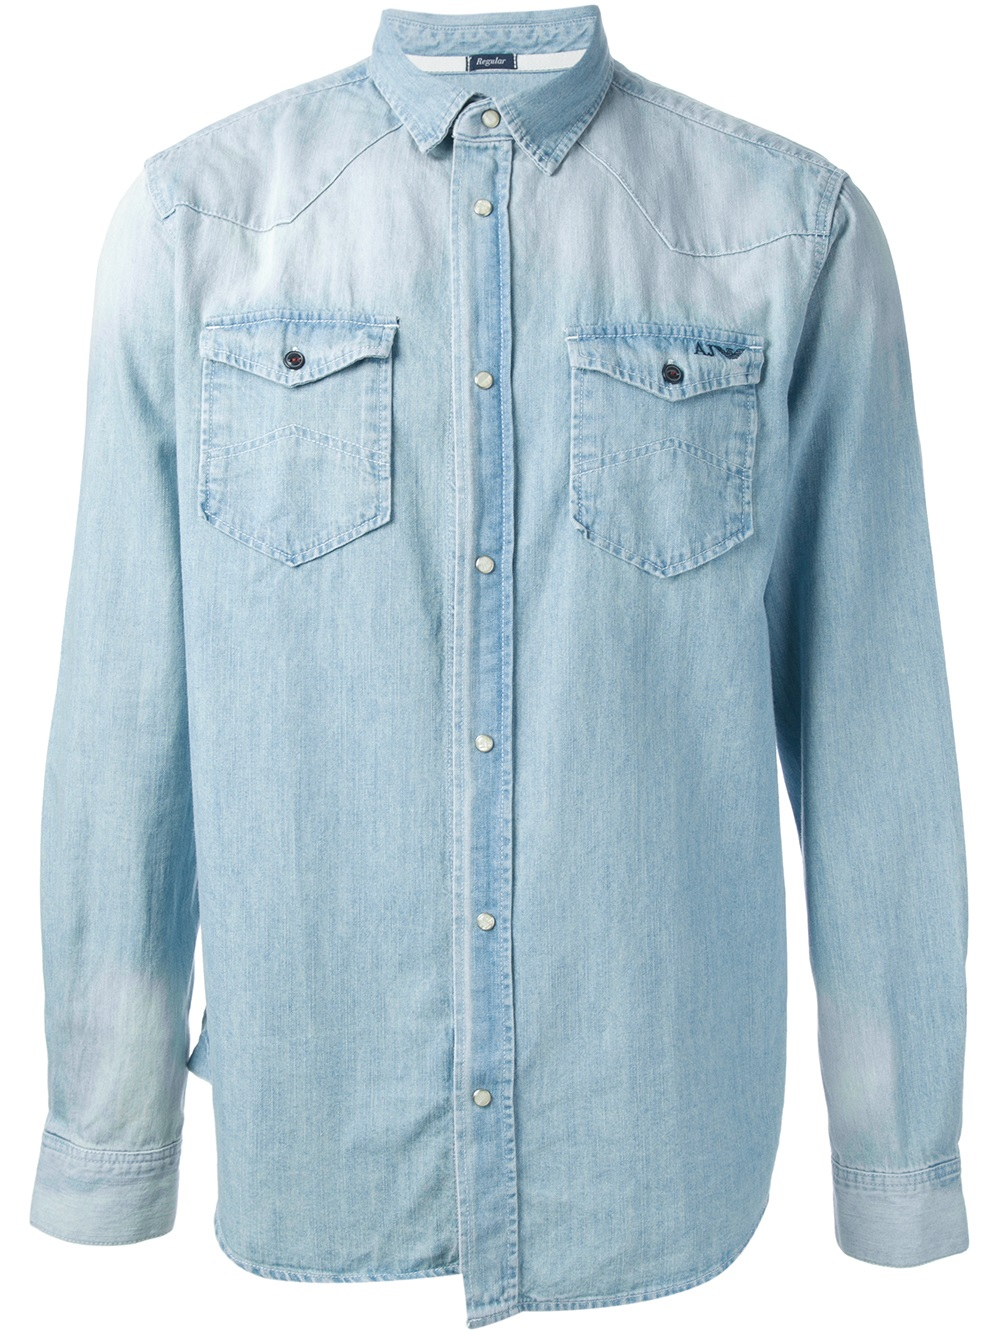 faded jeans shirt